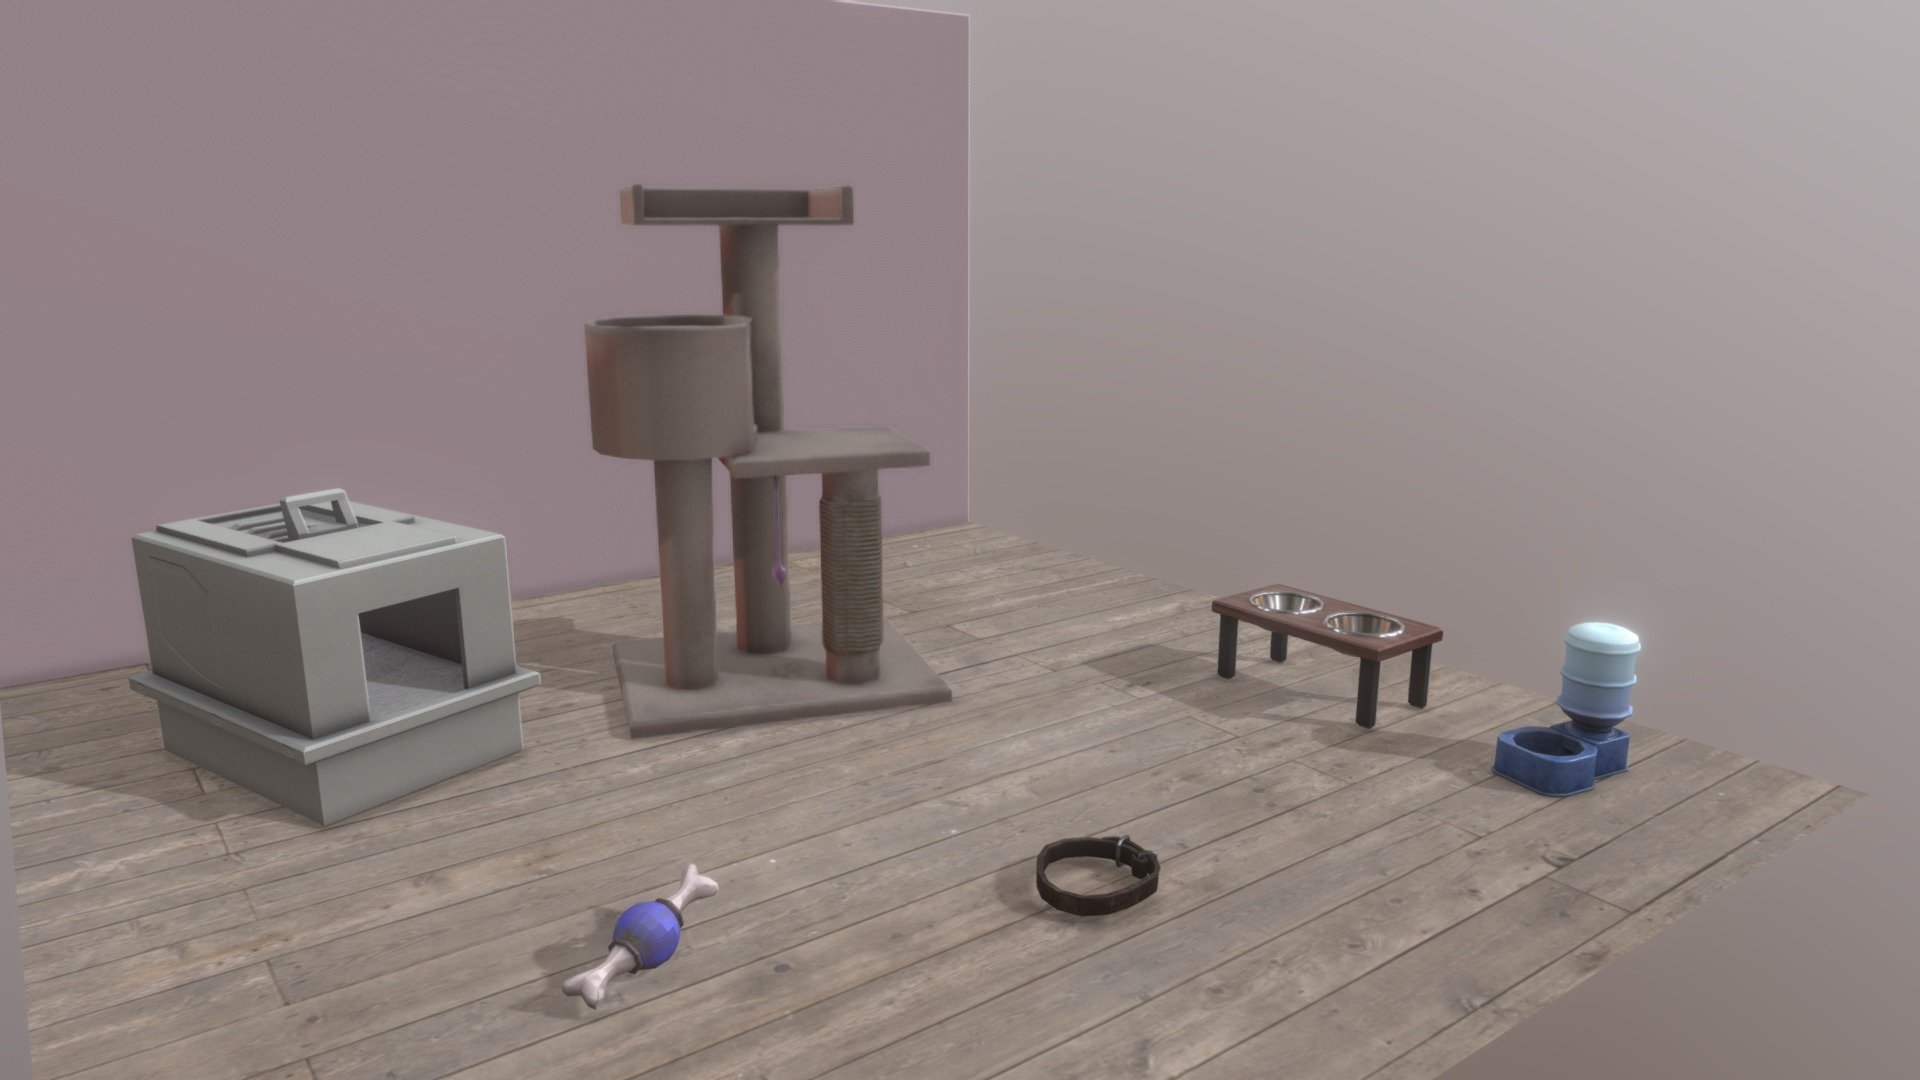 SGD 214 Modeling II assignment &ndash; Six Props. For this assignment I made props fitting a pet items theme. The props are: litterbox, dog toy, dog collar, food bowls, water bowl (gravity / self refilling bowl), and a cat tree 3d model